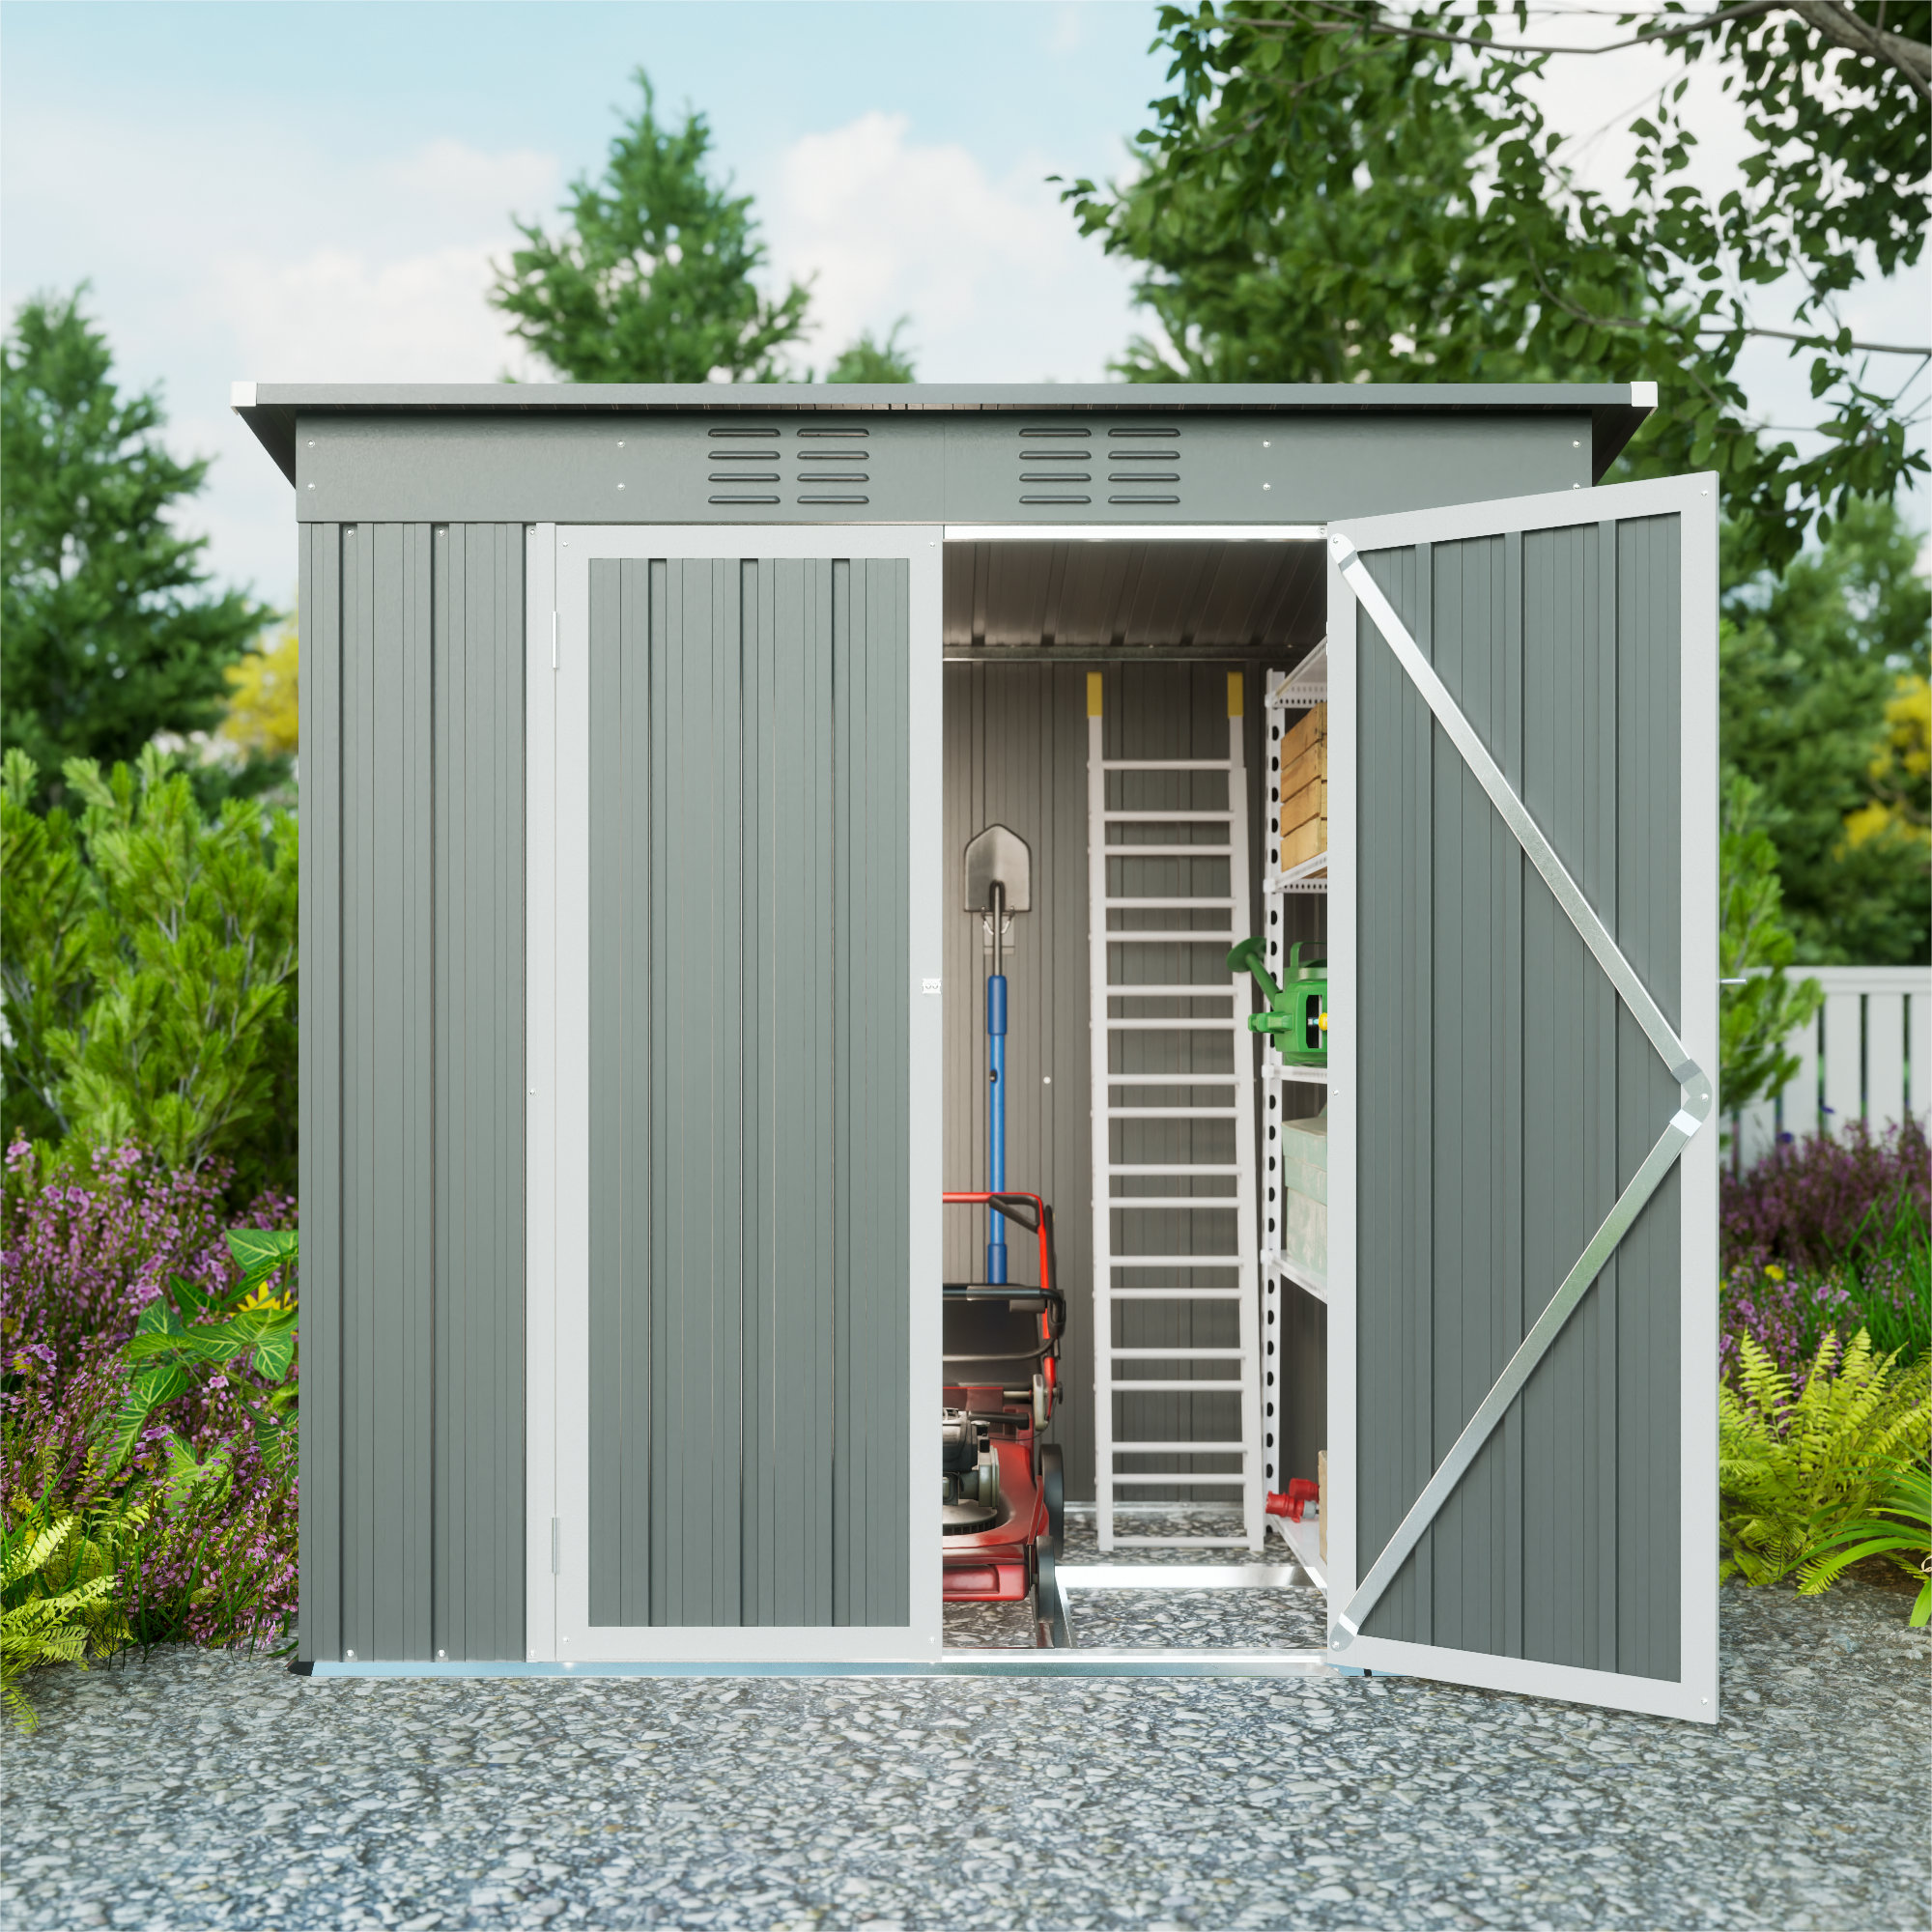 ShelterLogic 4' x 4' x 6' Water-Resistant Pop-Up Deck and Garden Storage  Shed Kit